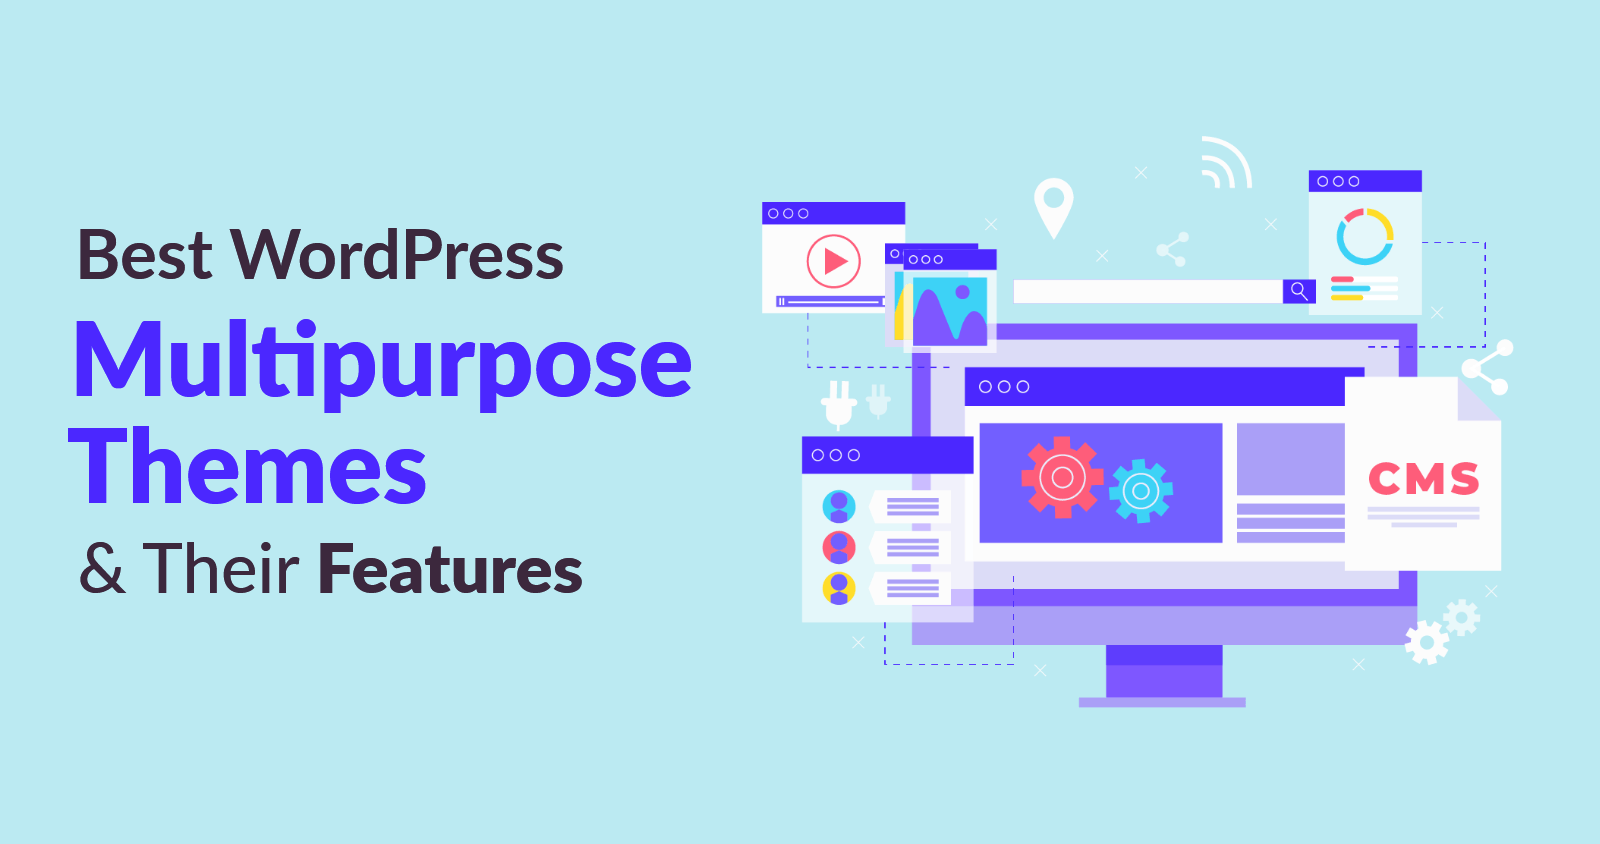 Best WordPress Multipurpose Themes & Their Features